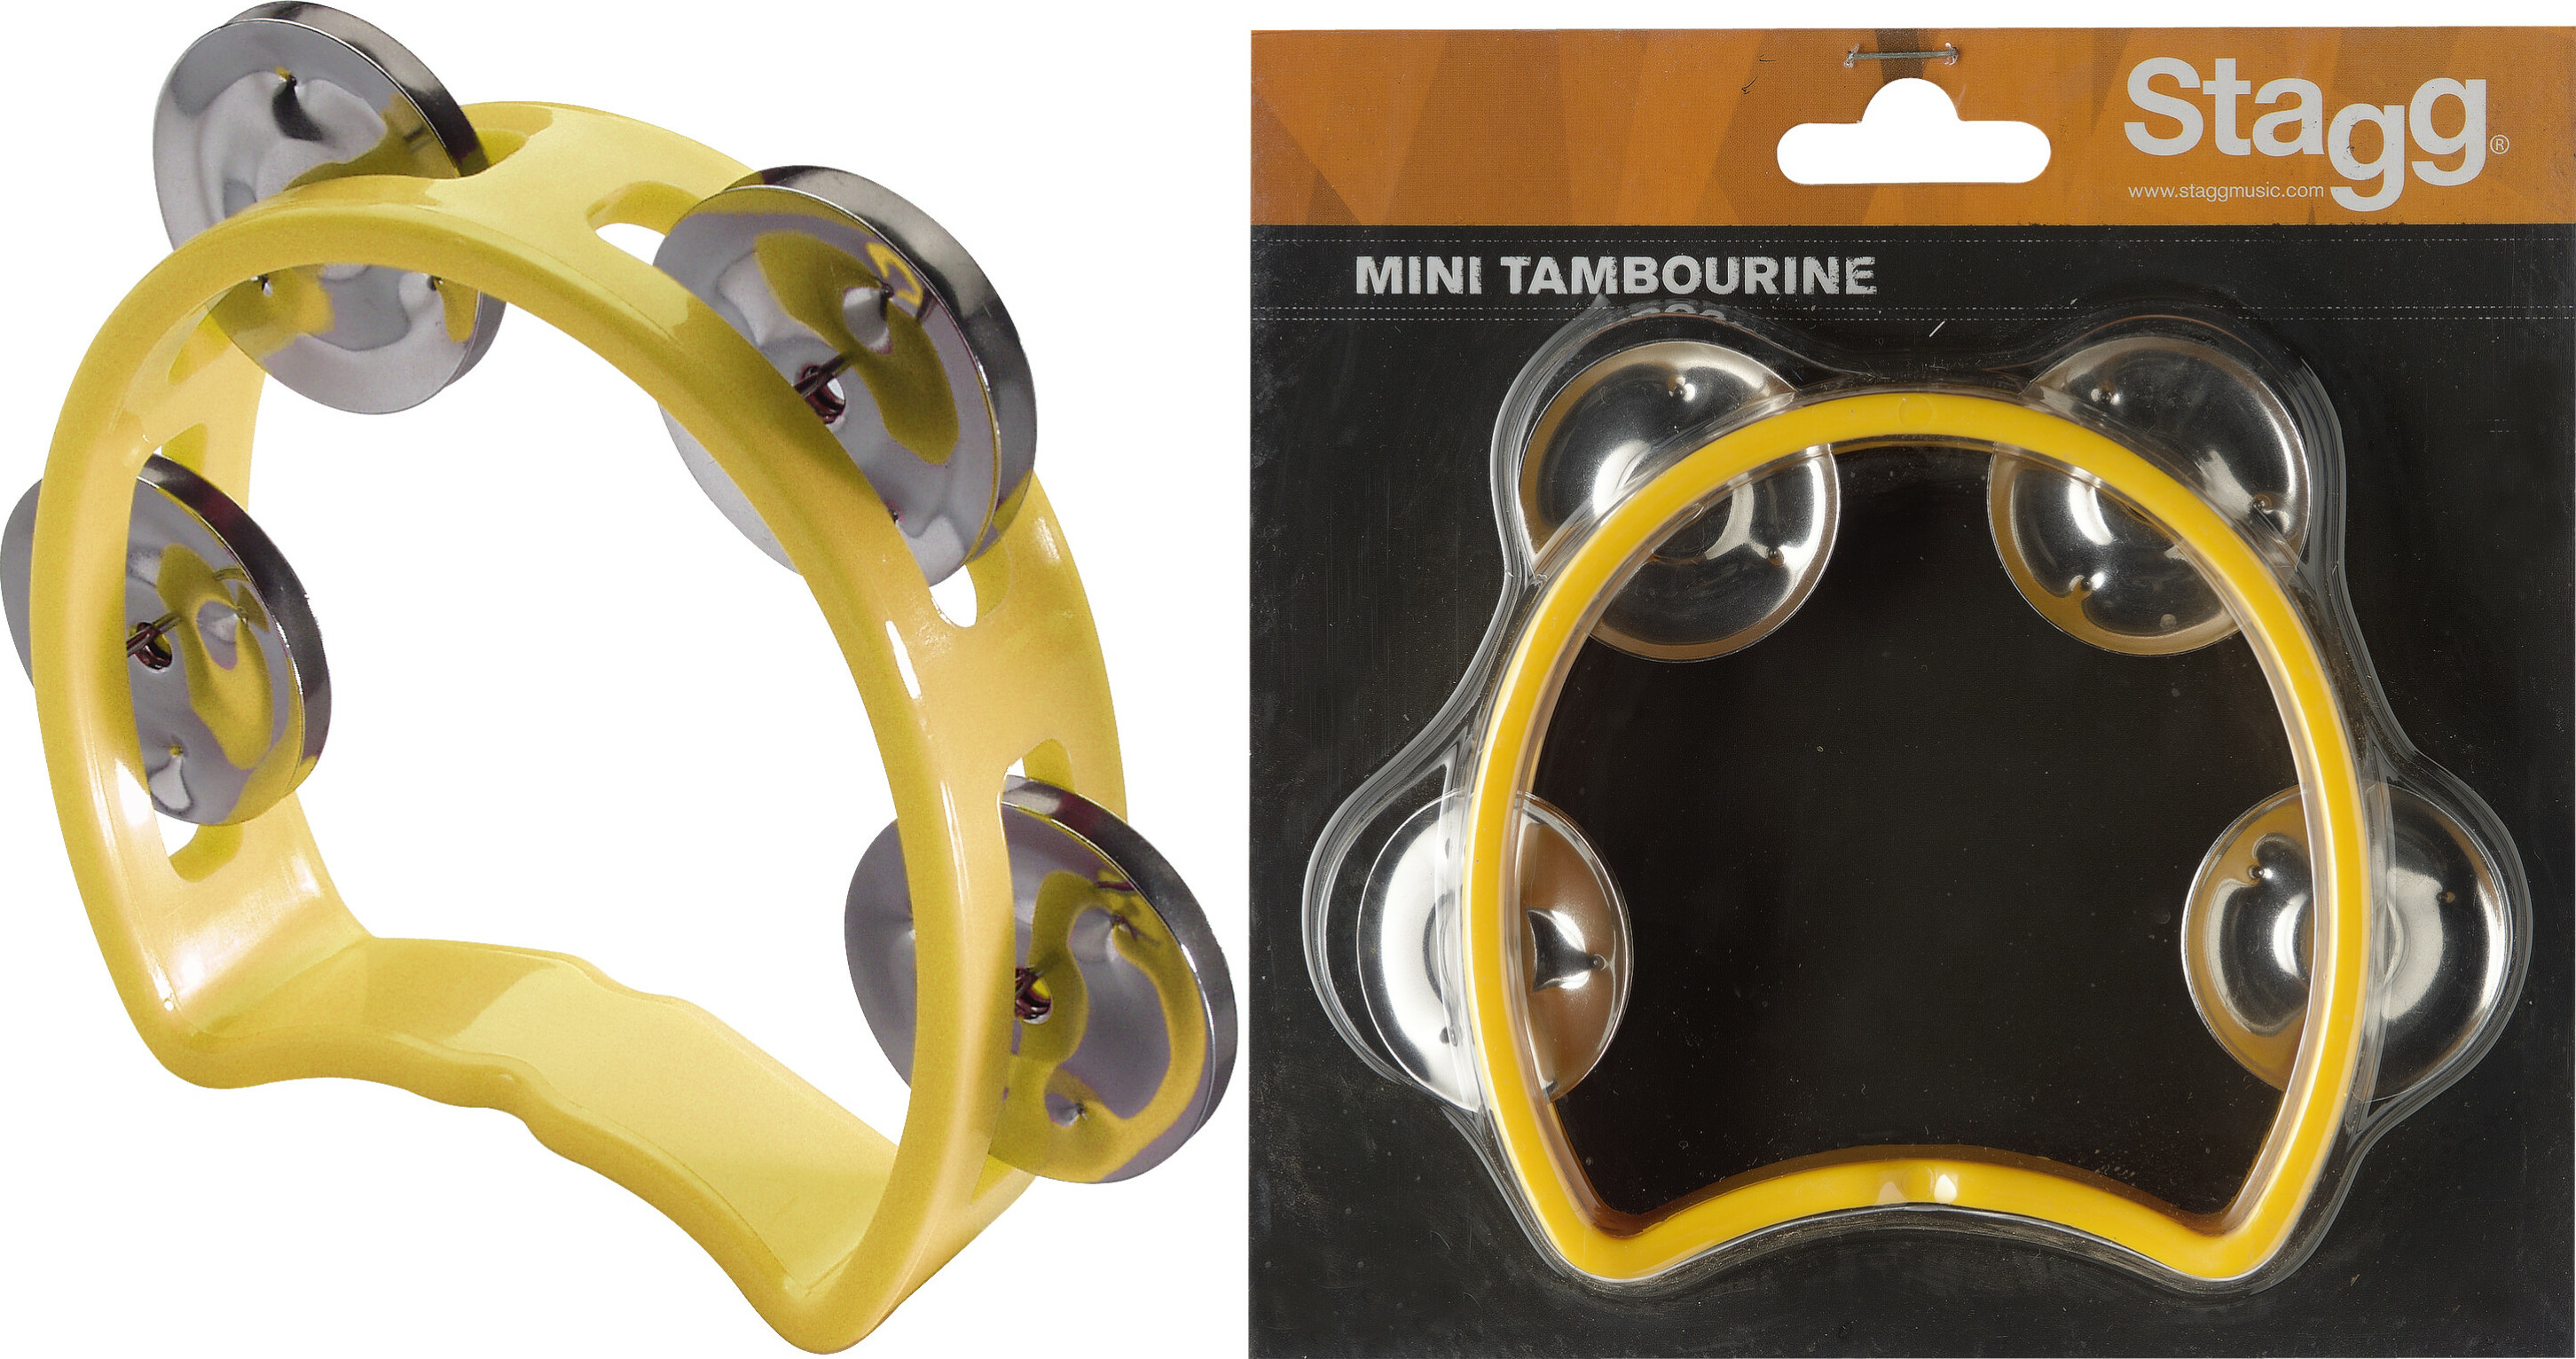 Stagg Tab-mini/yw Plastique 4 Cymbalettes Yellow - Percussie te schudden - Main picture